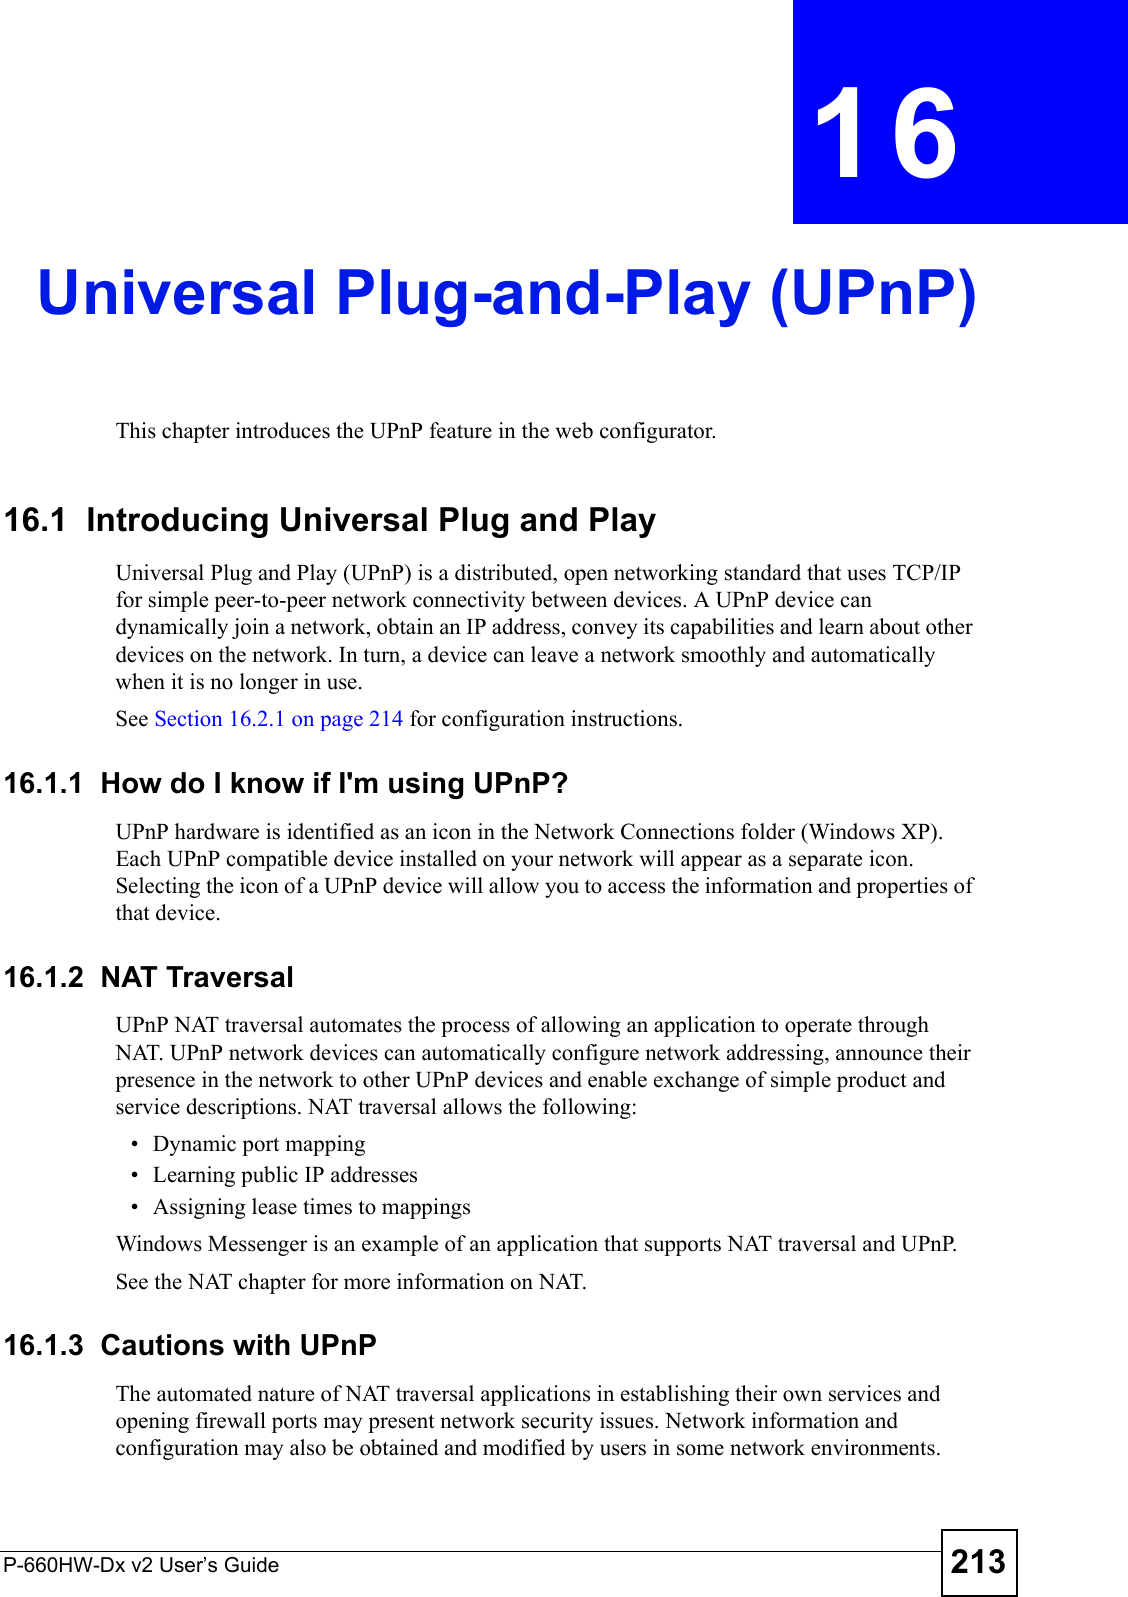 P-660HW-Dx v2 User’s Guide 213CHAPTER  16 Universal Plug-and-Play (UPnP)This chapter introduces the UPnP feature in the web configurator.16.1  Introducing Universal Plug and Play Universal Plug and Play (UPnP) is a distributed, open networking standard that uses TCP/IP for simple peer-to-peer network connectivity between devices. A UPnP device can dynamically join a network, obtain an IP address, convey its capabilities and learn about other devices on the network. In turn, a device can leave a network smoothly and automatically when it is no longer in use.See Section 16.2.1 on page 214 for configuration instructions. 16.1.1  How do I know if I&apos;m using UPnP? UPnP hardware is identified as an icon in the Network Connections folder (Windows XP). Each UPnP compatible device installed on your network will appear as a separate icon. Selecting the icon of a UPnP device will allow you to access the information and properties of that device. 16.1.2  NAT TraversalUPnP NAT traversal automates the process of allowing an application to operate through NAT. UPnP network devices can automatically configure network addressing, announce their presence in the network to other UPnP devices and enable exchange of simple product and service descriptions. NAT traversal allows the following:• Dynamic port mapping• Learning public IP addresses• Assigning lease times to mappingsWindows Messenger is an example of an application that supports NAT traversal and UPnP. See the NAT chapter for more information on NAT.16.1.3  Cautions with UPnPThe automated nature of NAT traversal applications in establishing their own services and opening firewall ports may present network security issues. Network information and configuration may also be obtained and modified by users in some network environments. 